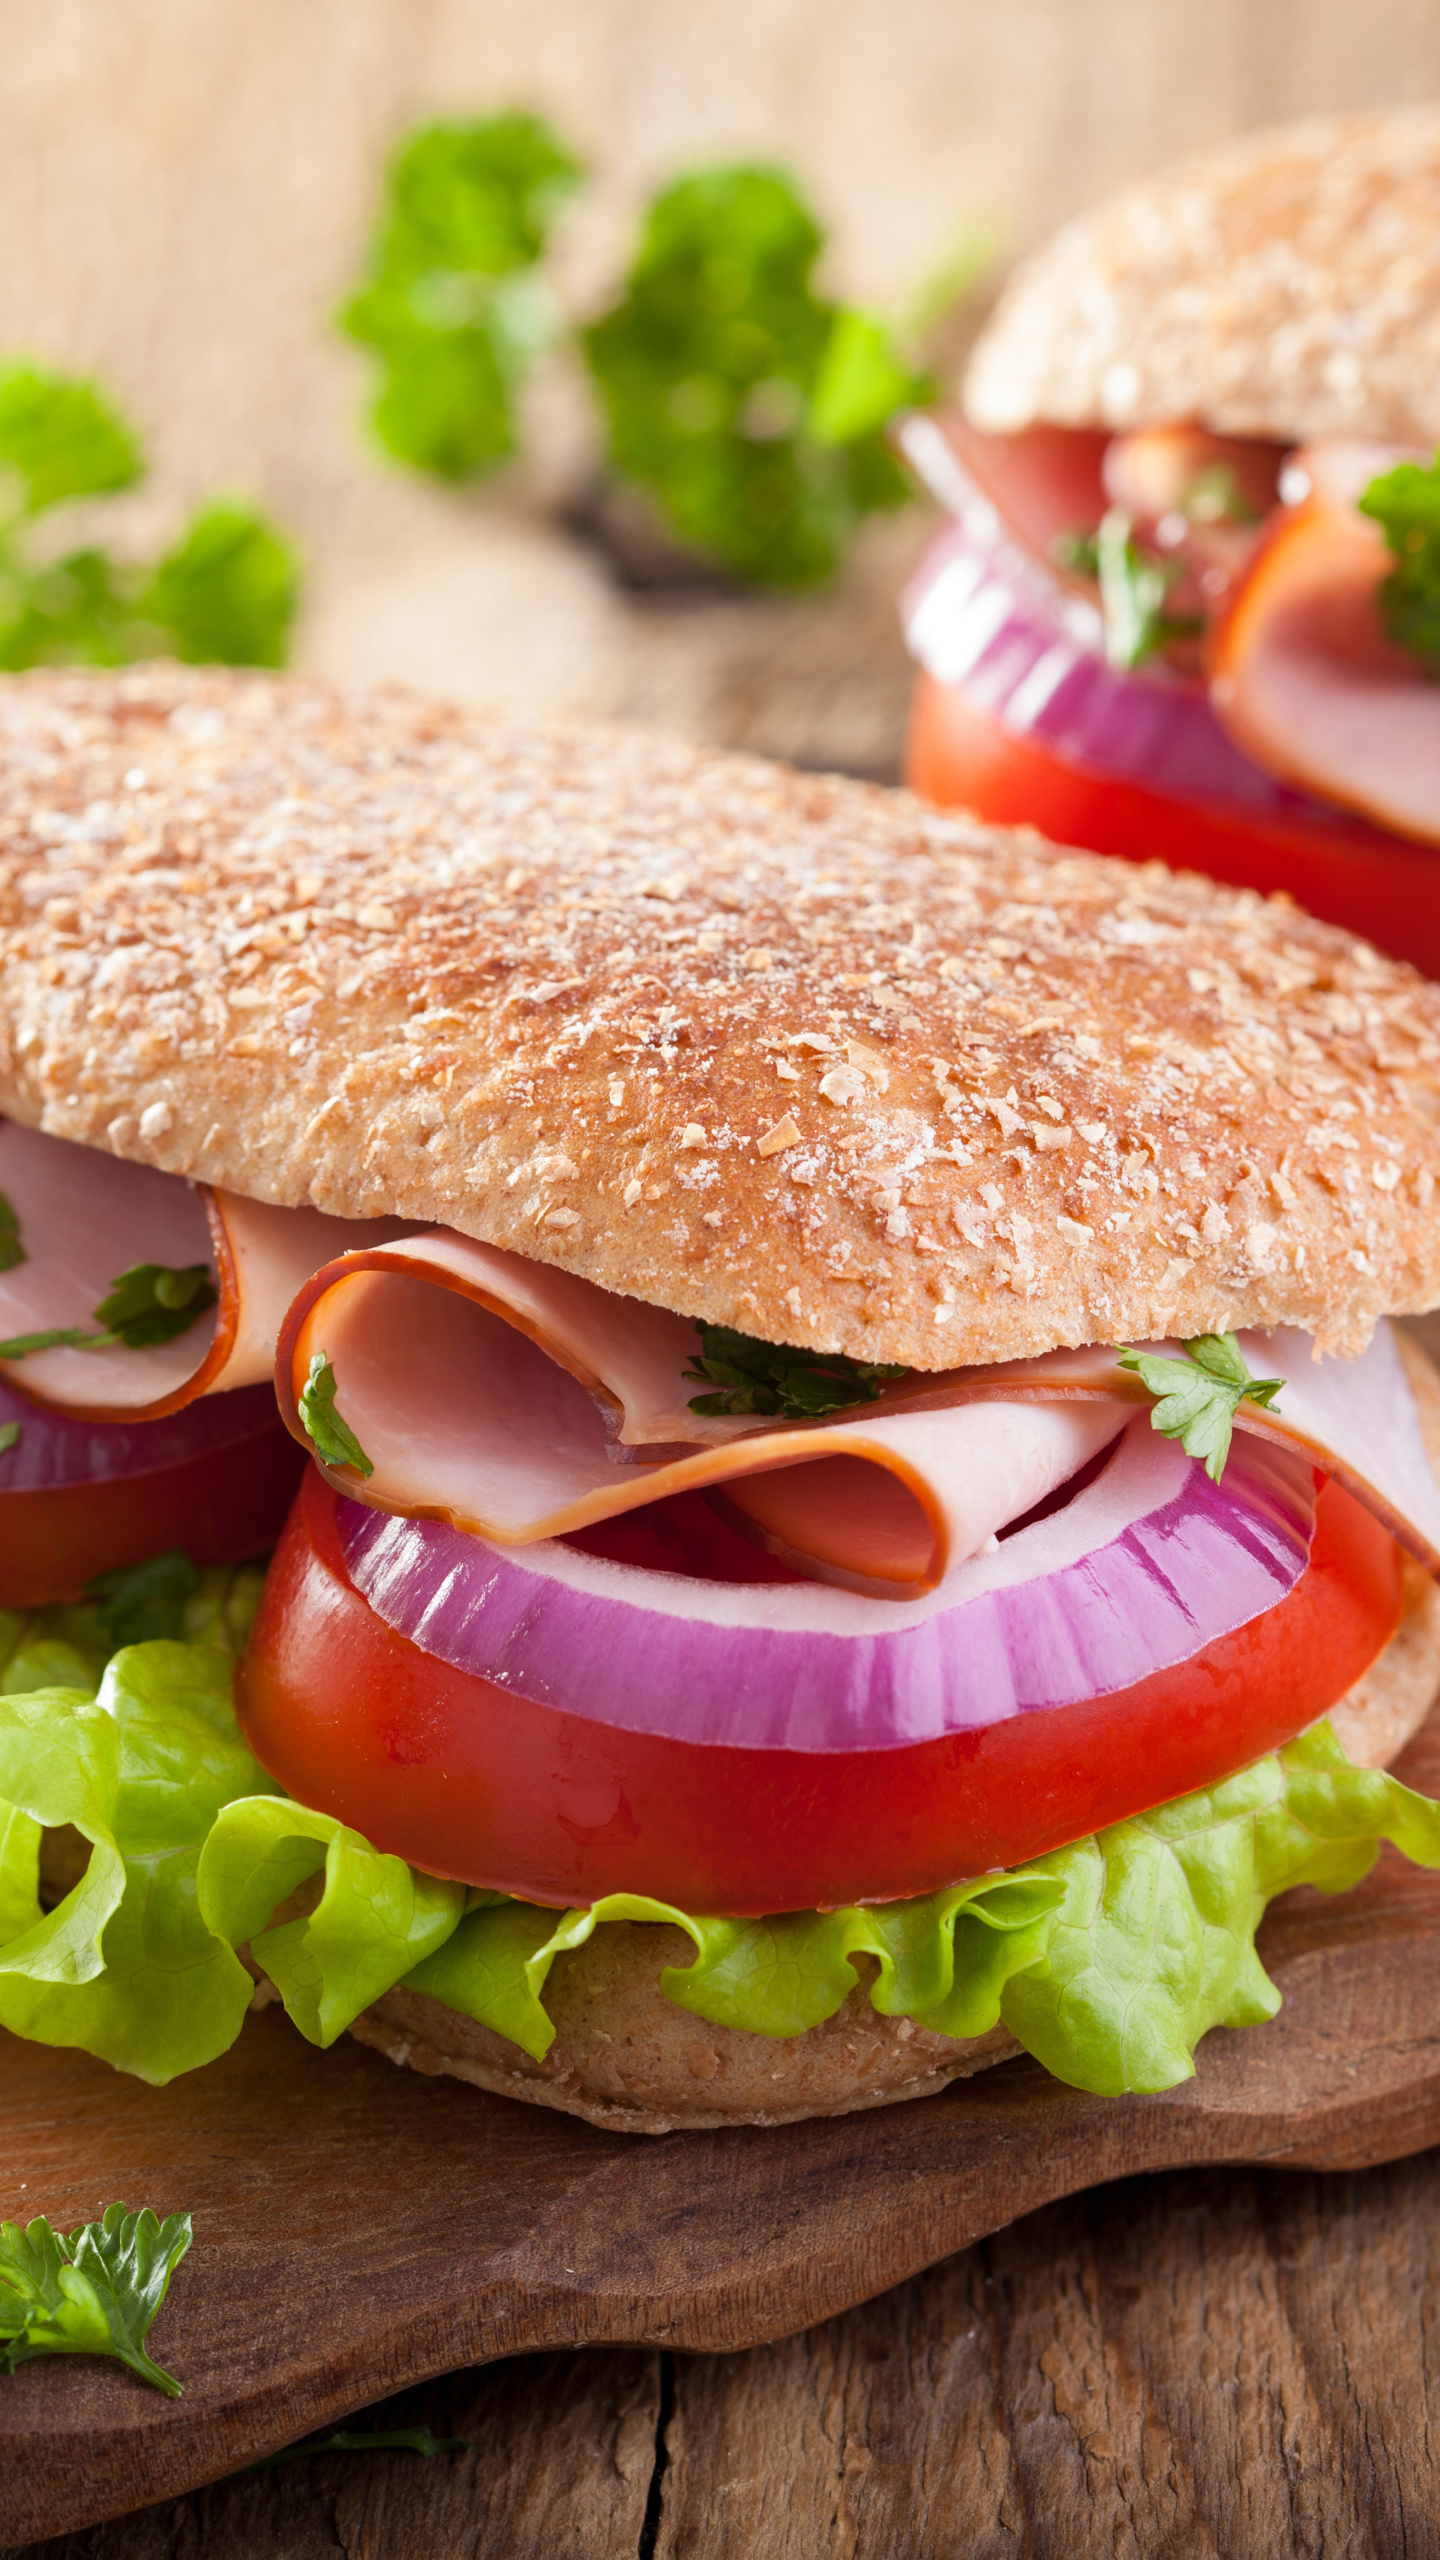 Sandwich: Open-faced have only one slice of bread with the filling on top. 1440x2560 HD Background.